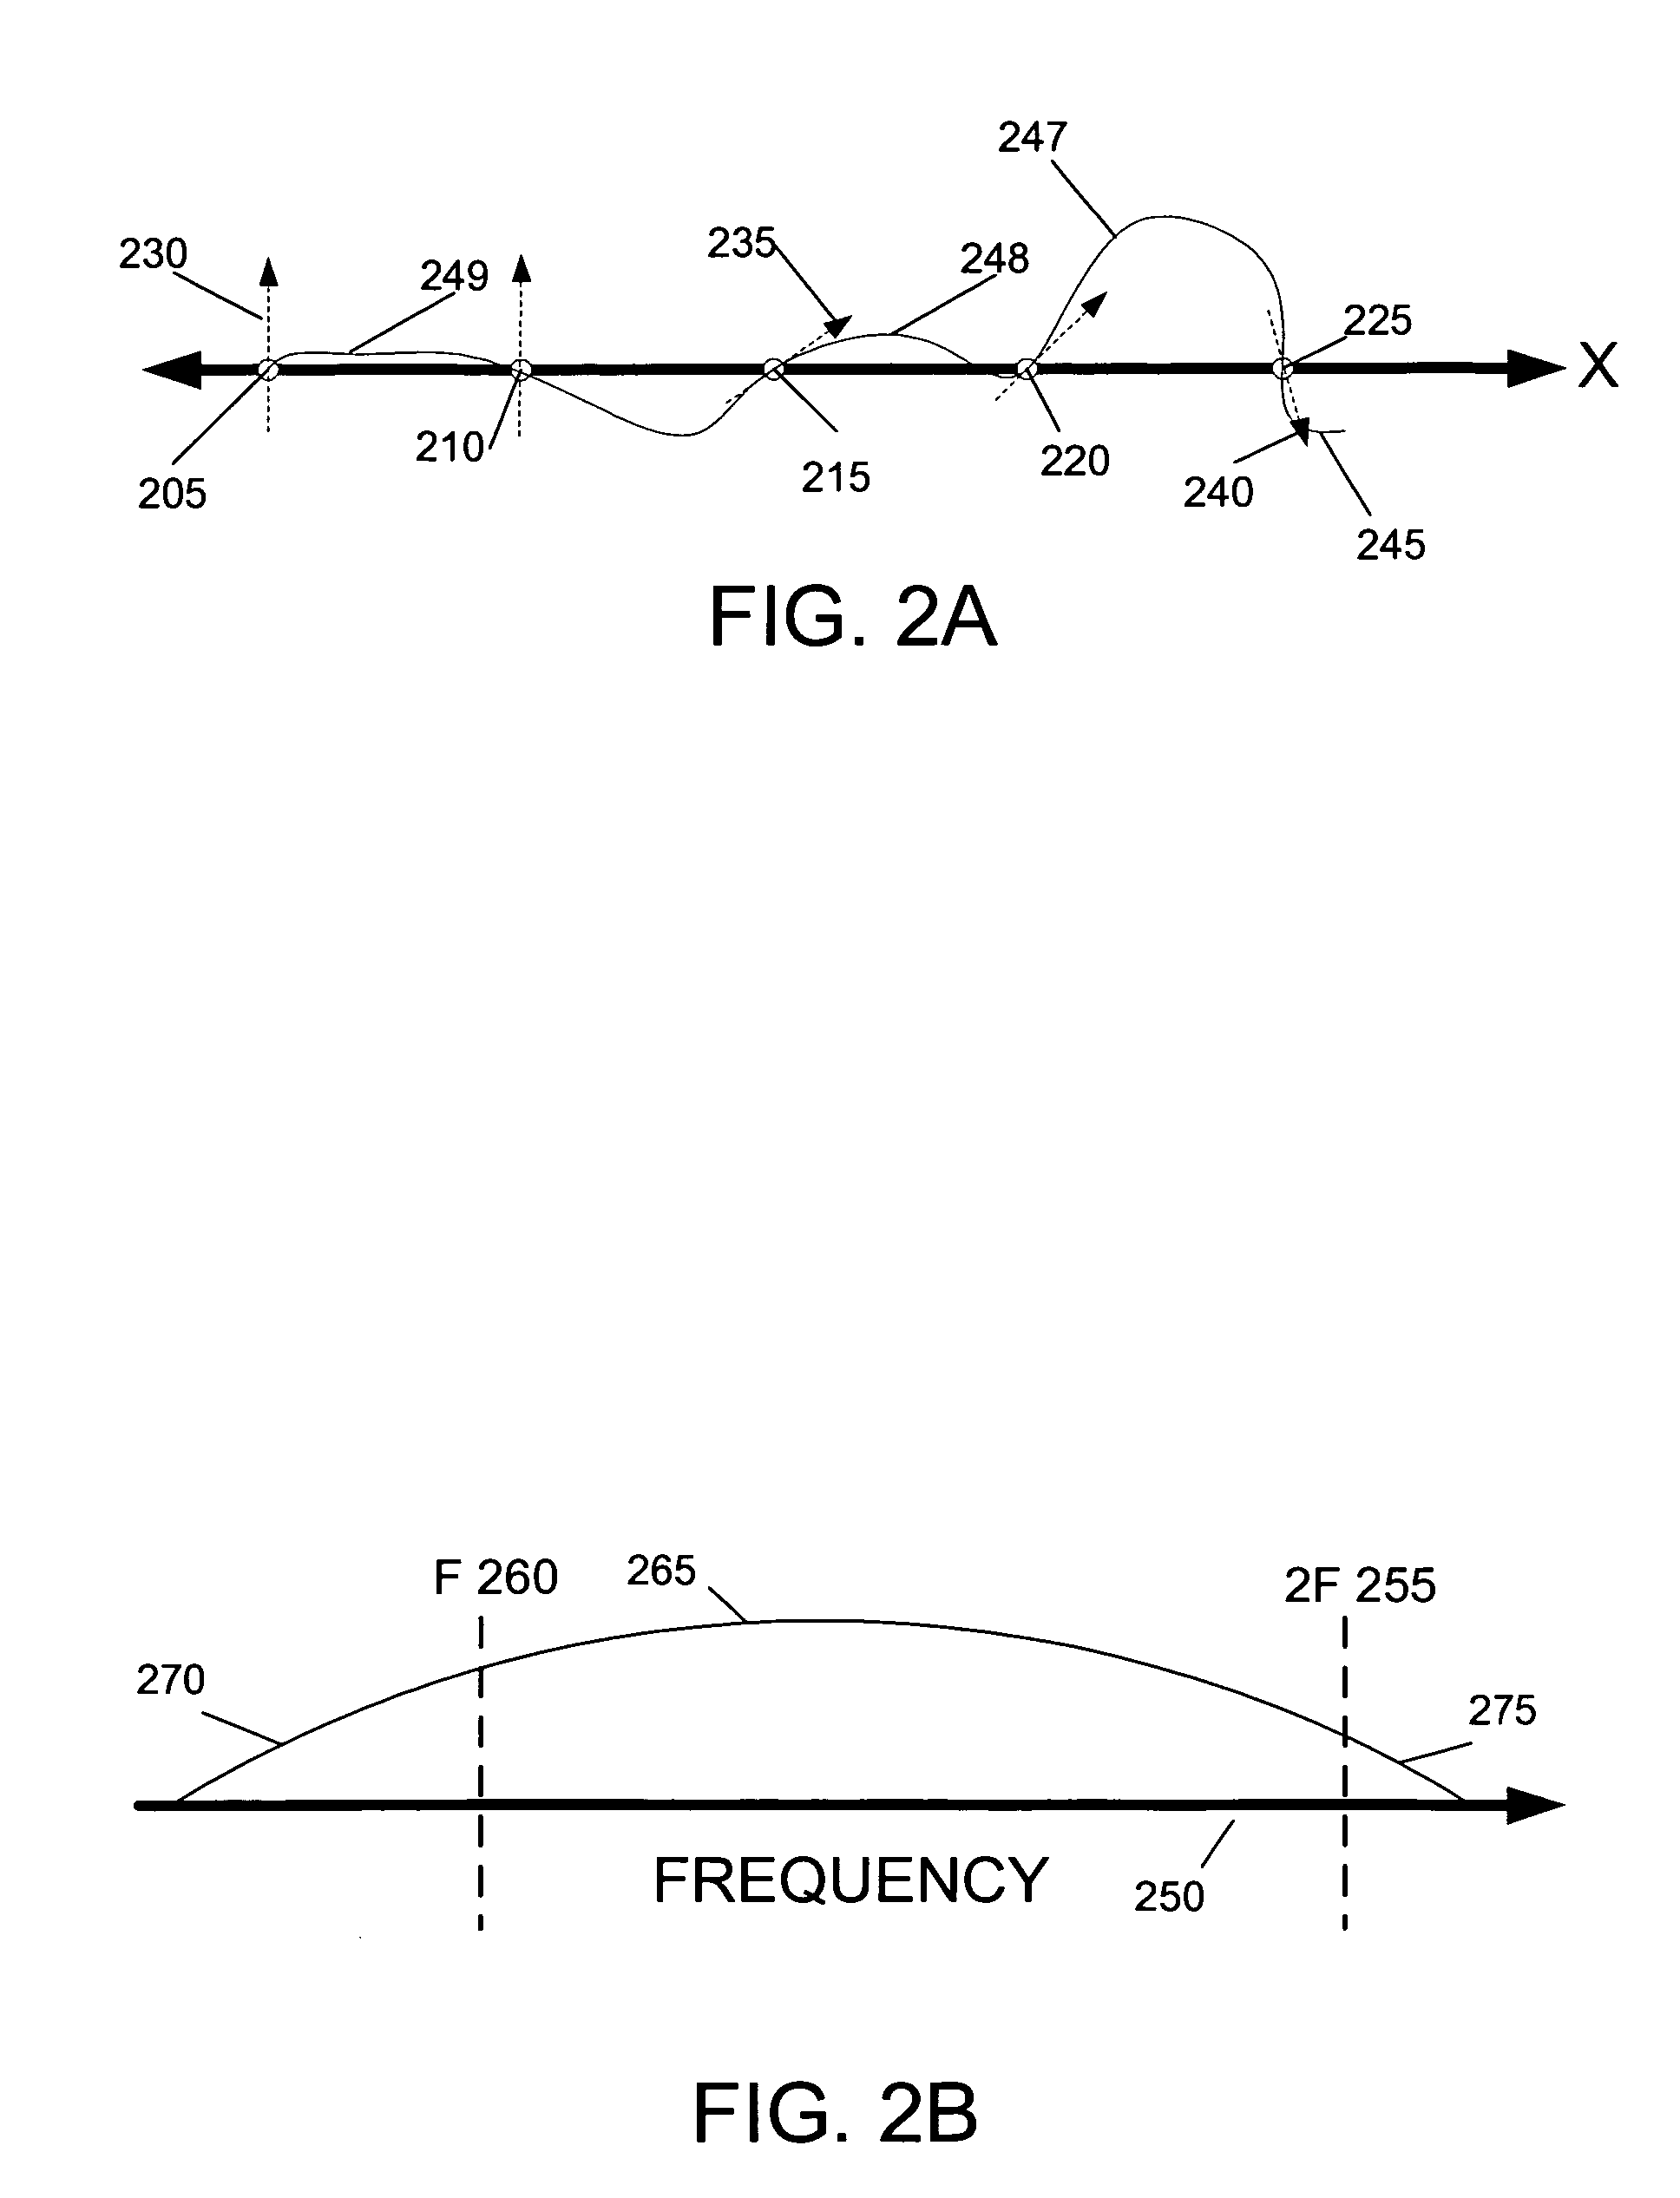 Method of creating and evaluating bandlimited noise for computer graphics